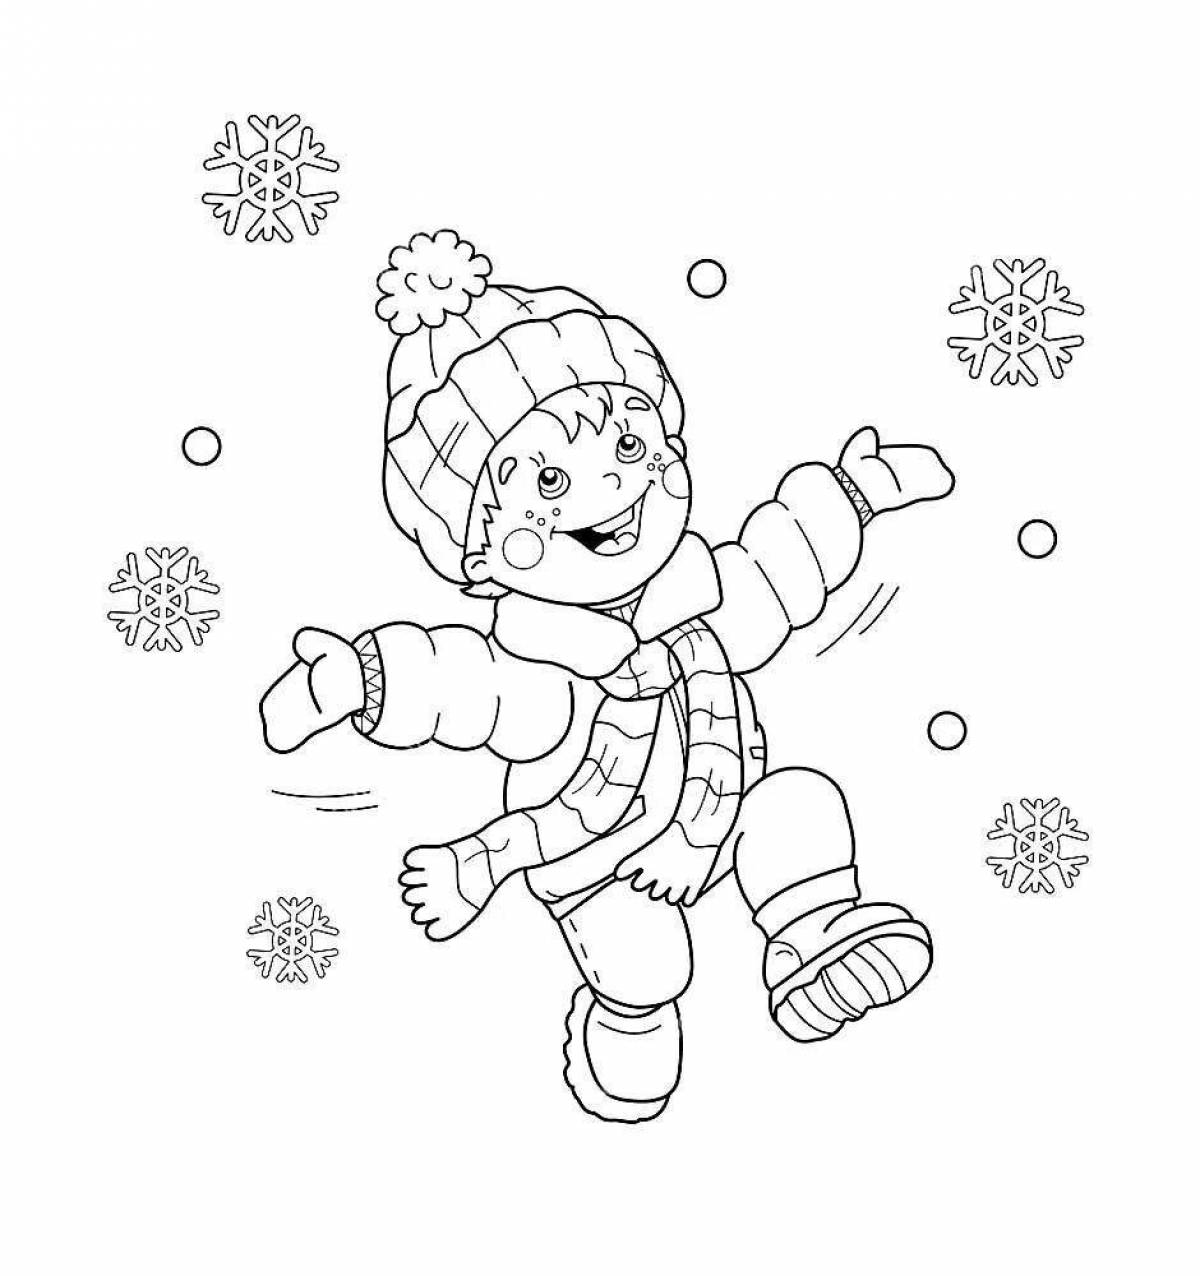 Fun coloring book of snow for kids